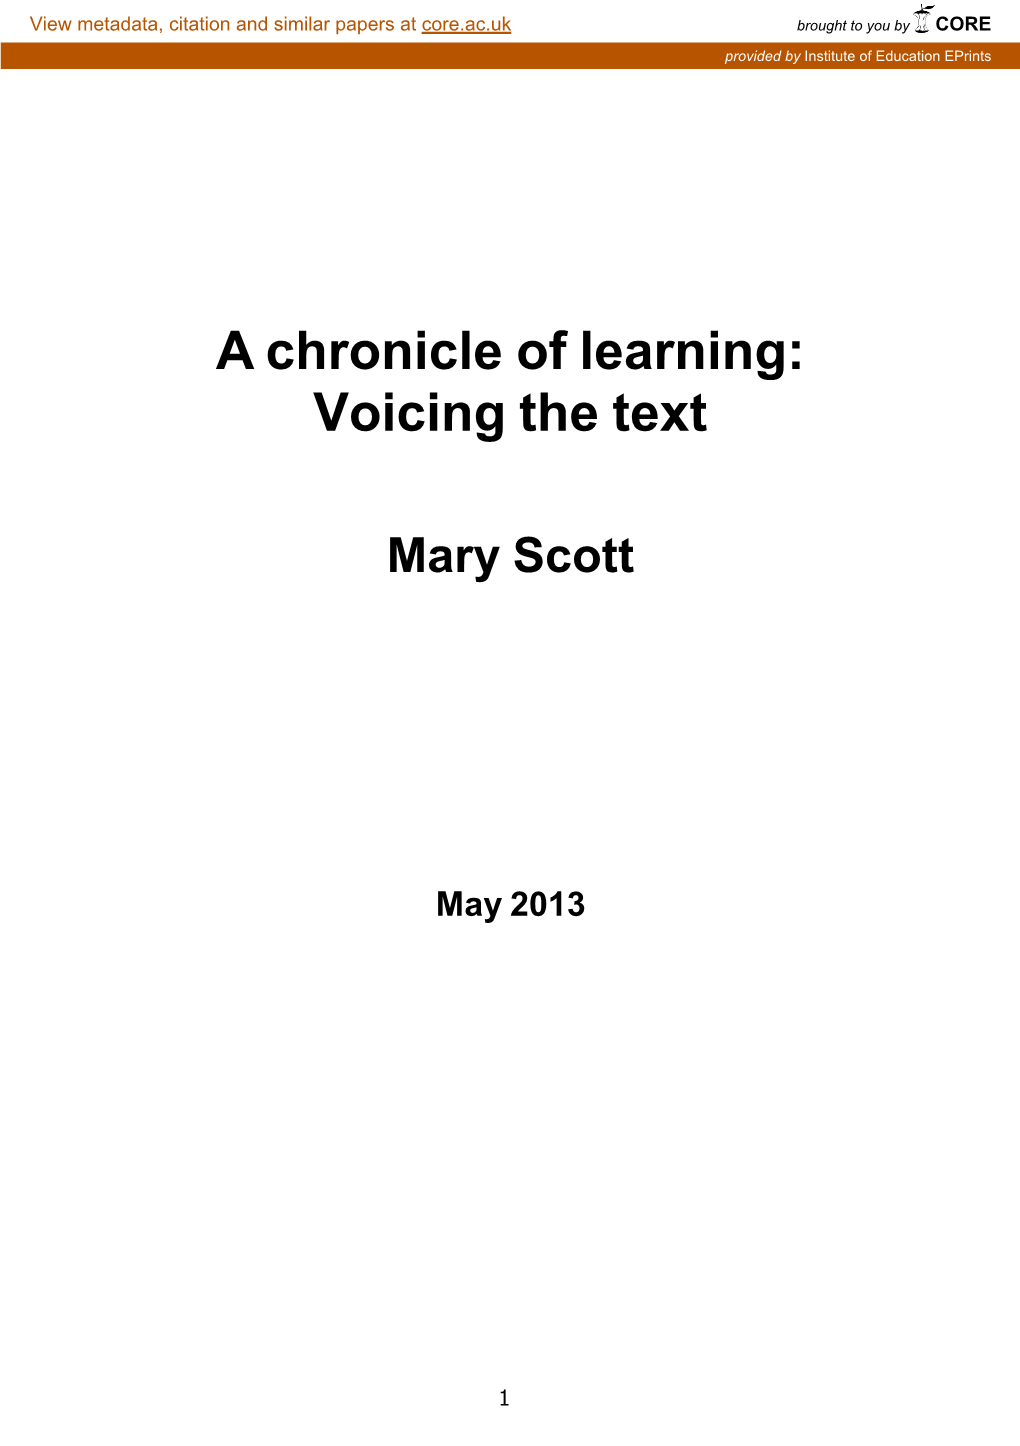 A Chronicle of Learning: Voicing the Text